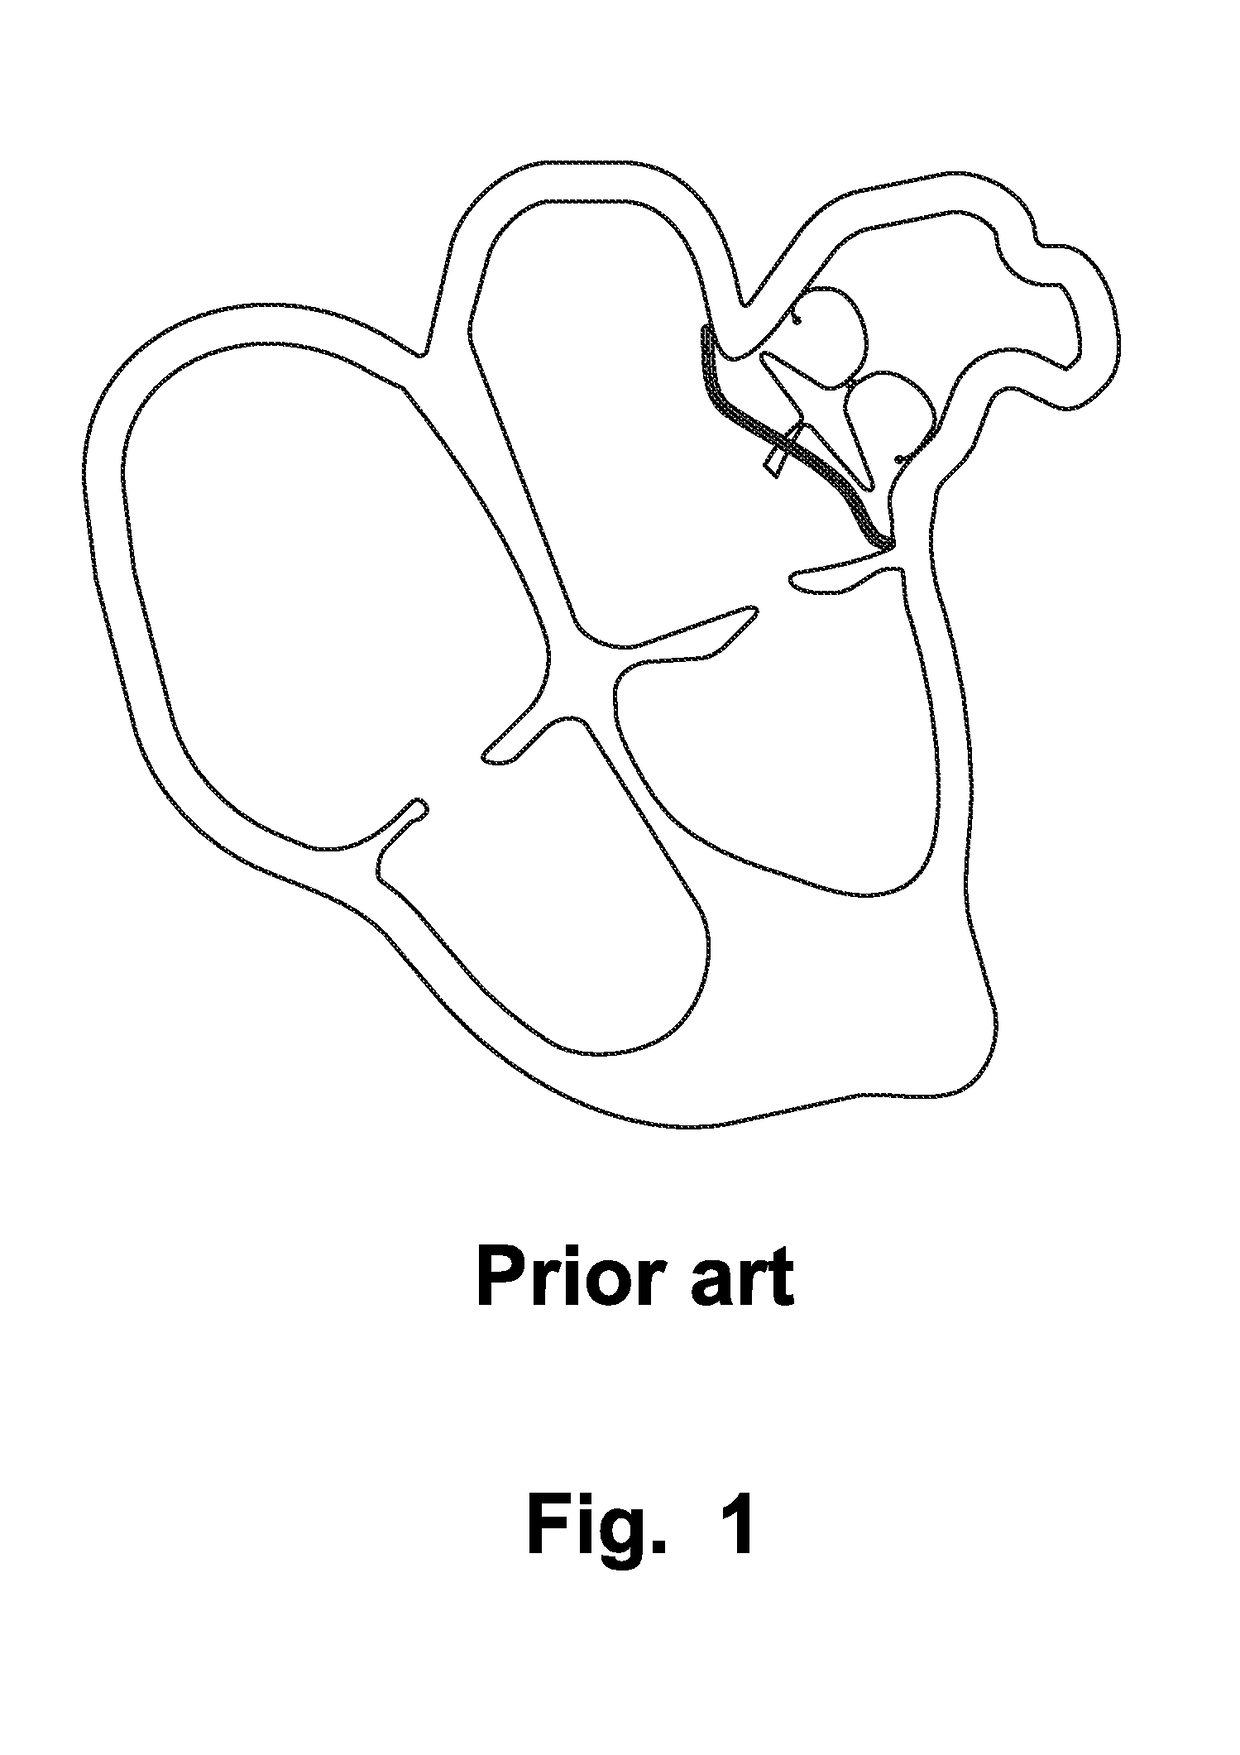 Left Atrial Appendage Occluder